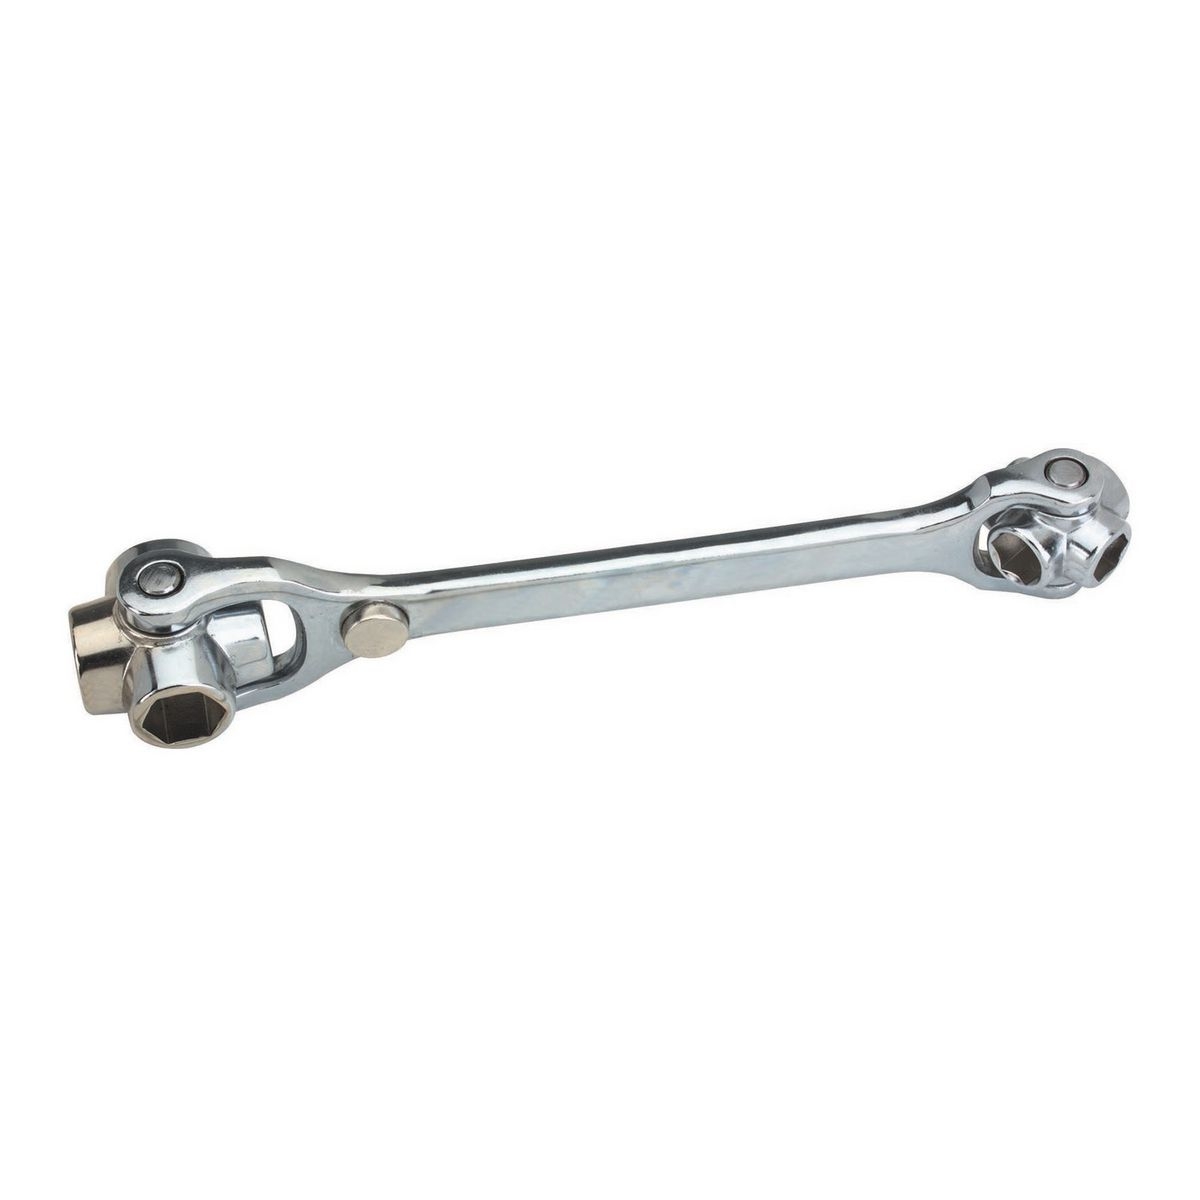 PITTSBURGH 8-In-1 SAE Socket Wrench – Item 60830 / 65498